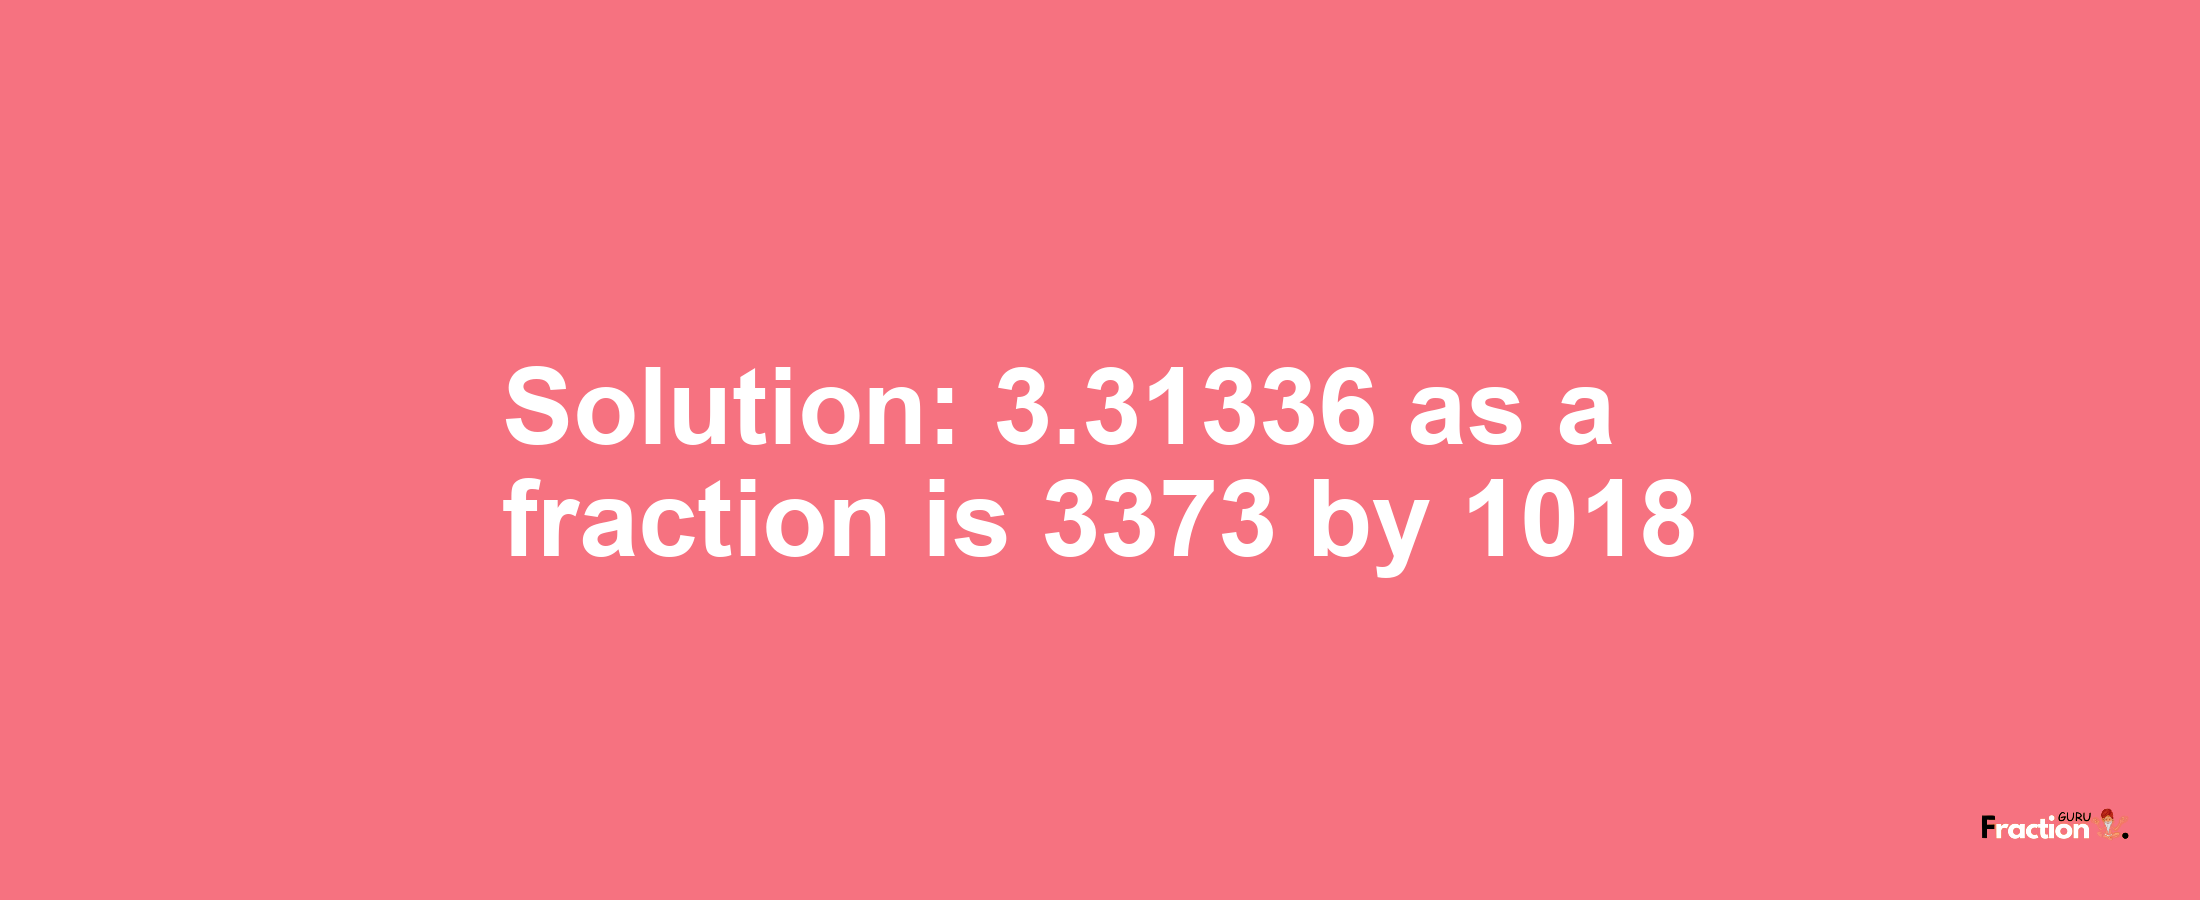 Solution:3.31336 as a fraction is 3373/1018